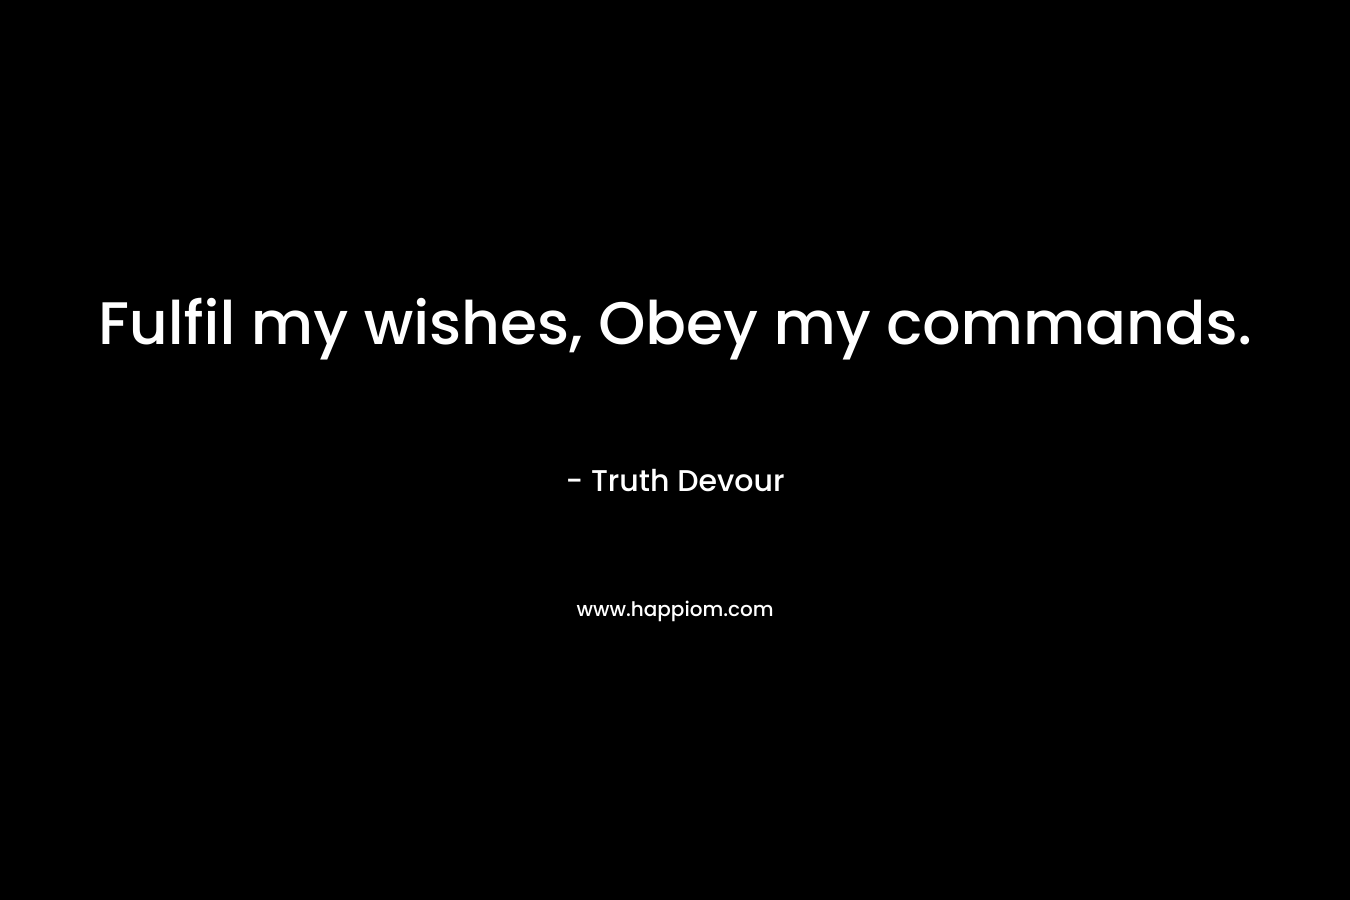 Fulfil my wishes, Obey my commands.